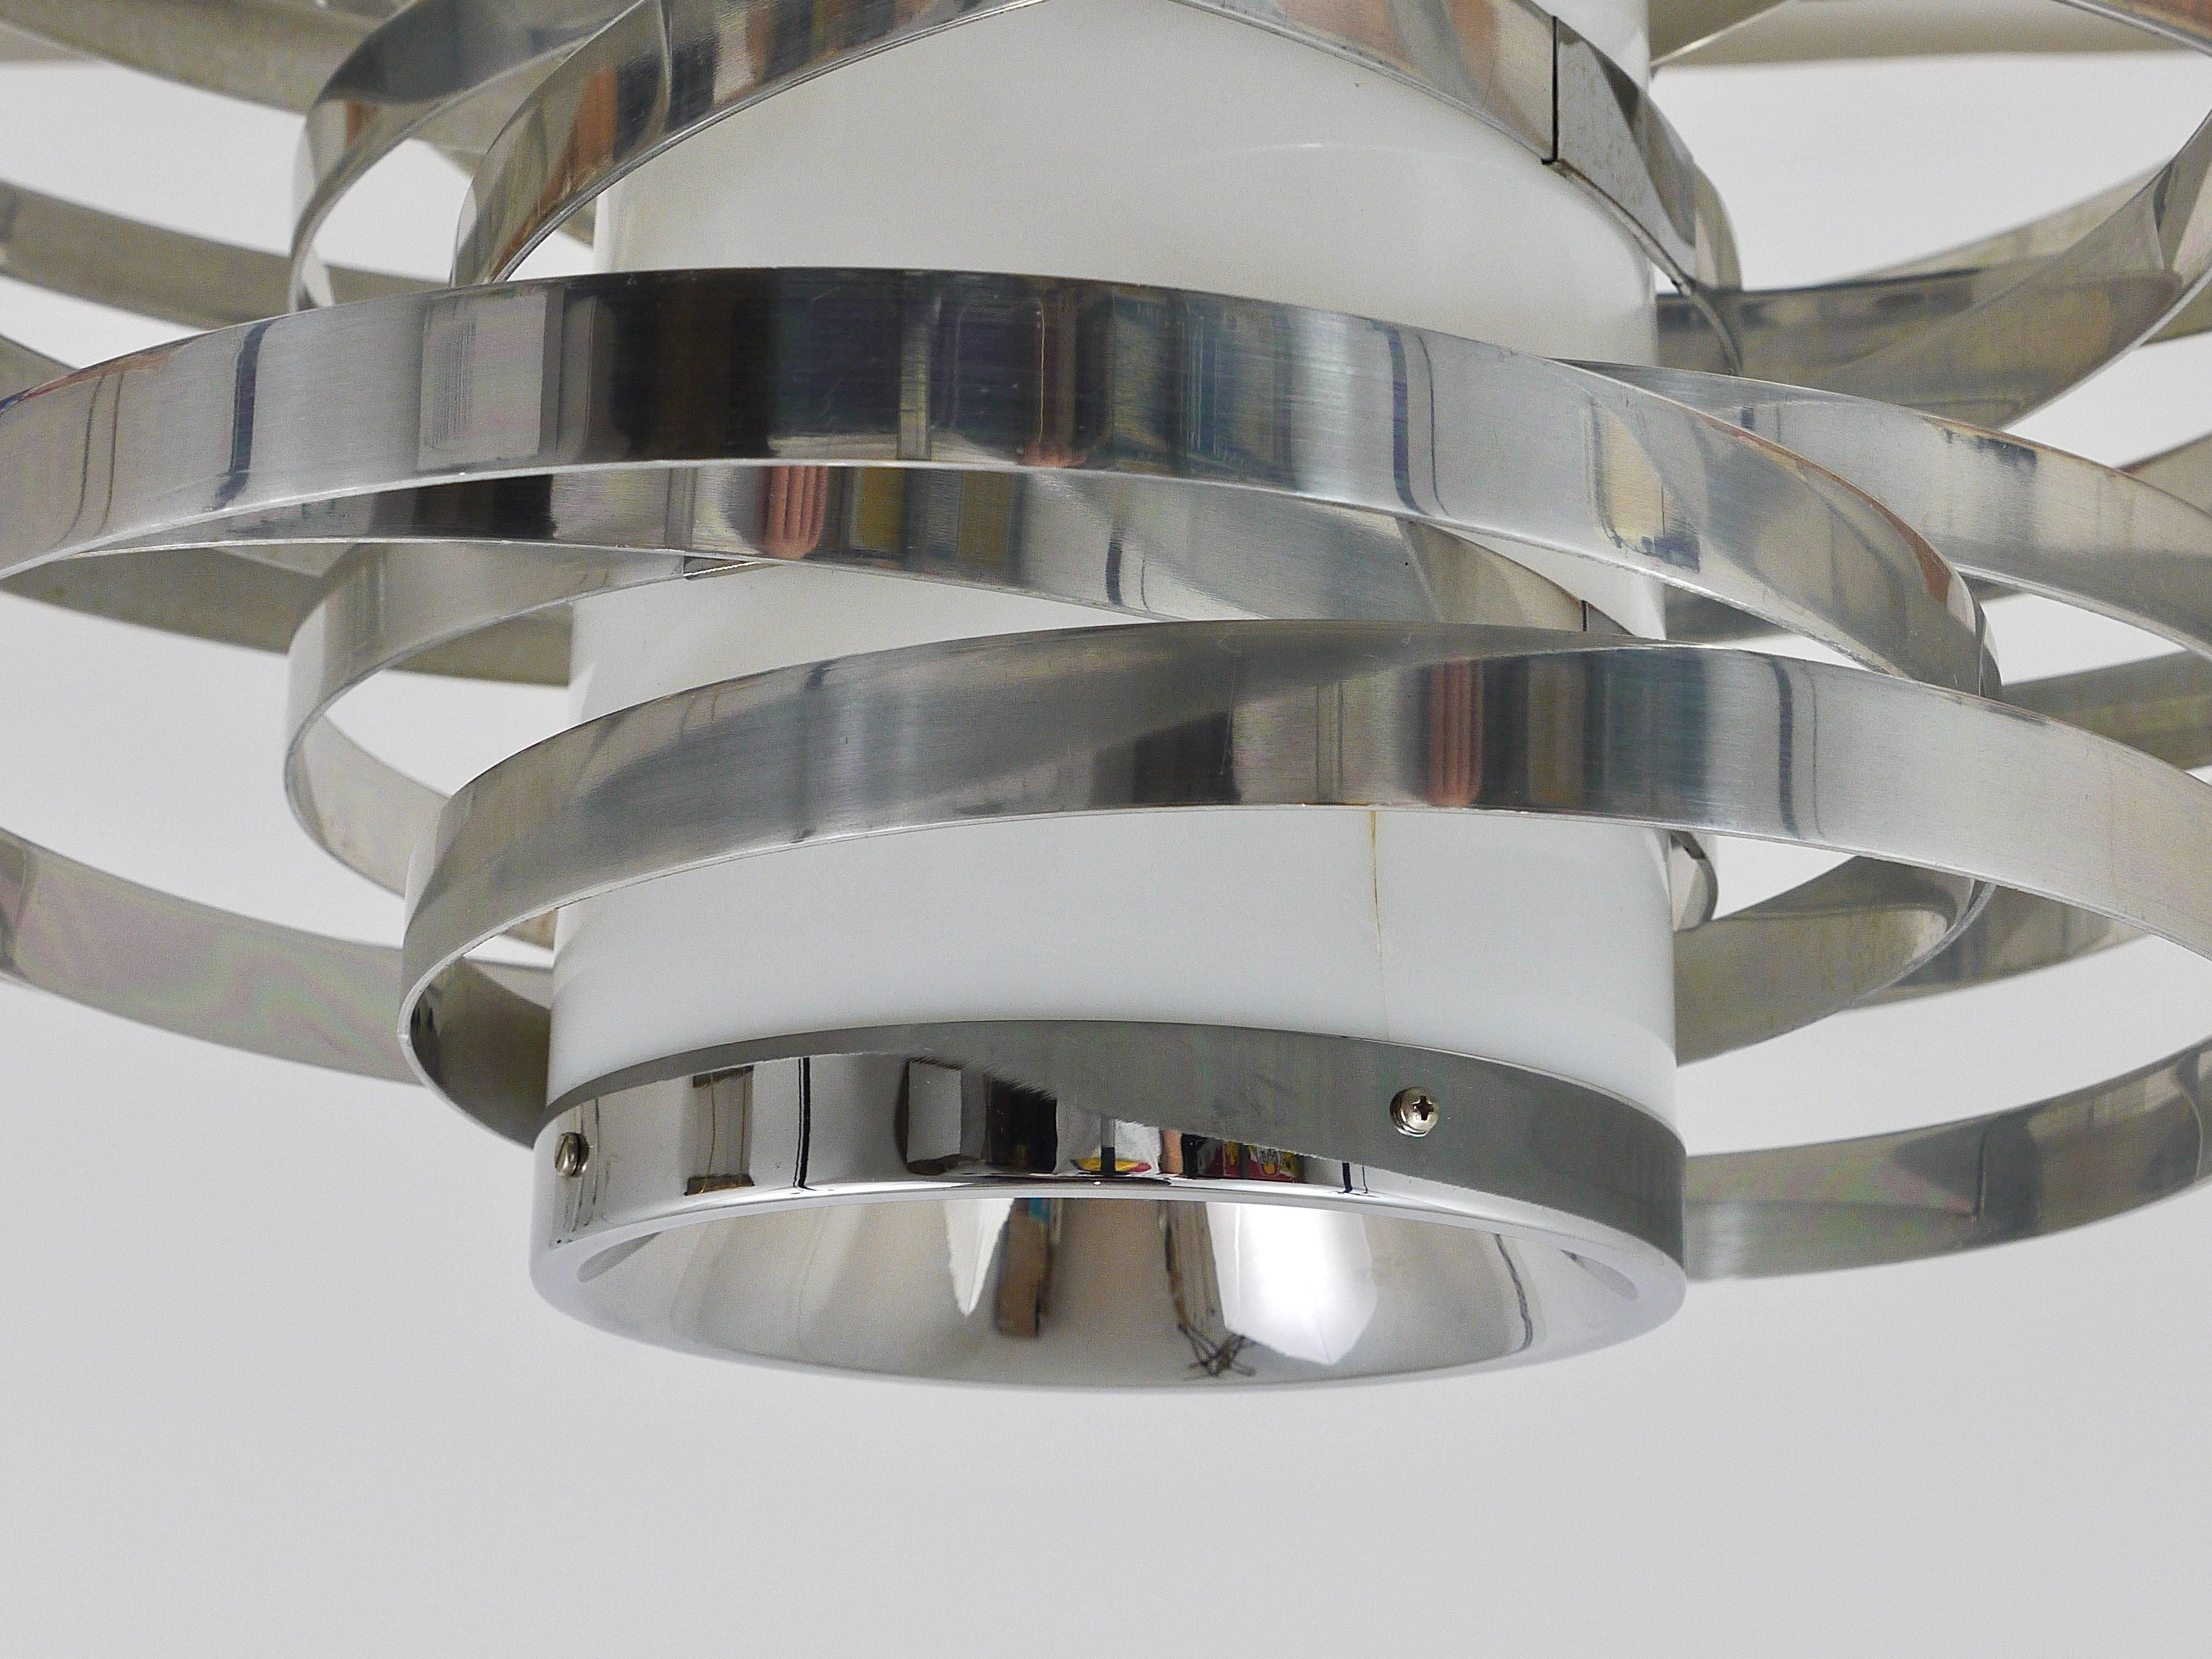 The large model of the iconic cyclone pendant light from the 1970s. Designed by Max Sause for Gaetano Sciolari, Rom, Italy. Polished aluminium band rings mounted on a white central acrylic Perspex glass cylinder giving amazing light effects. In good